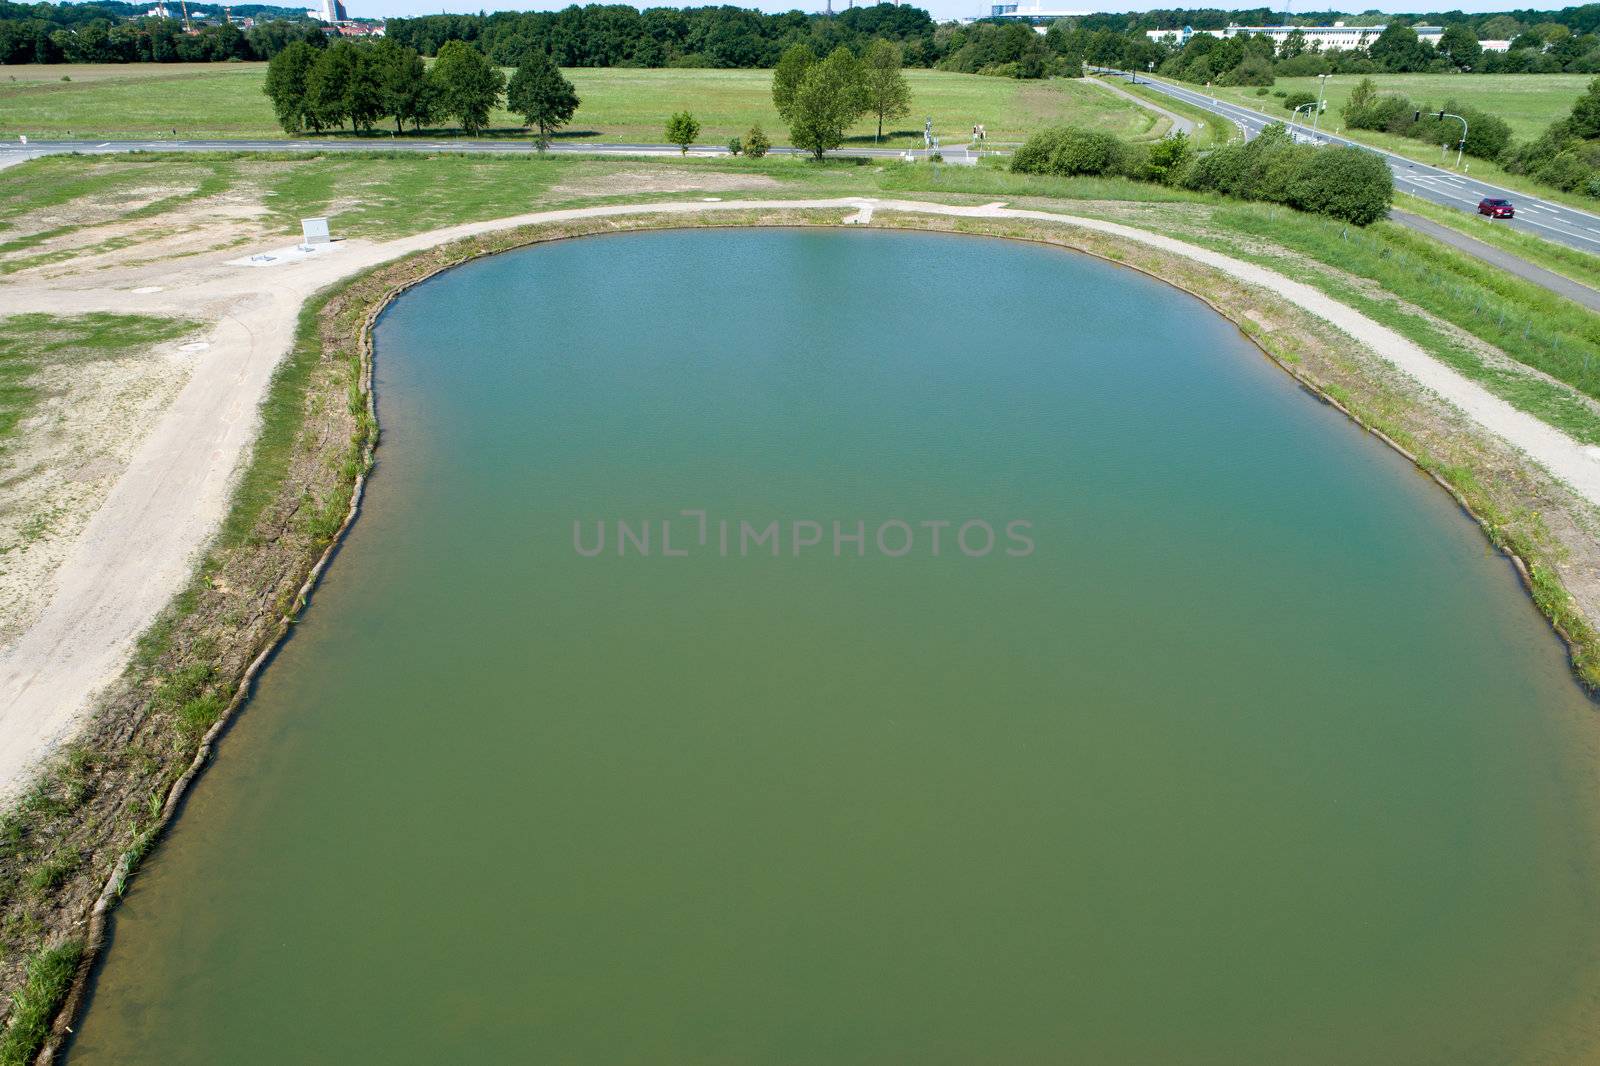 Rainwater retention basin with turquoise coloured water, taken diagonally from the air with a drone by geogif